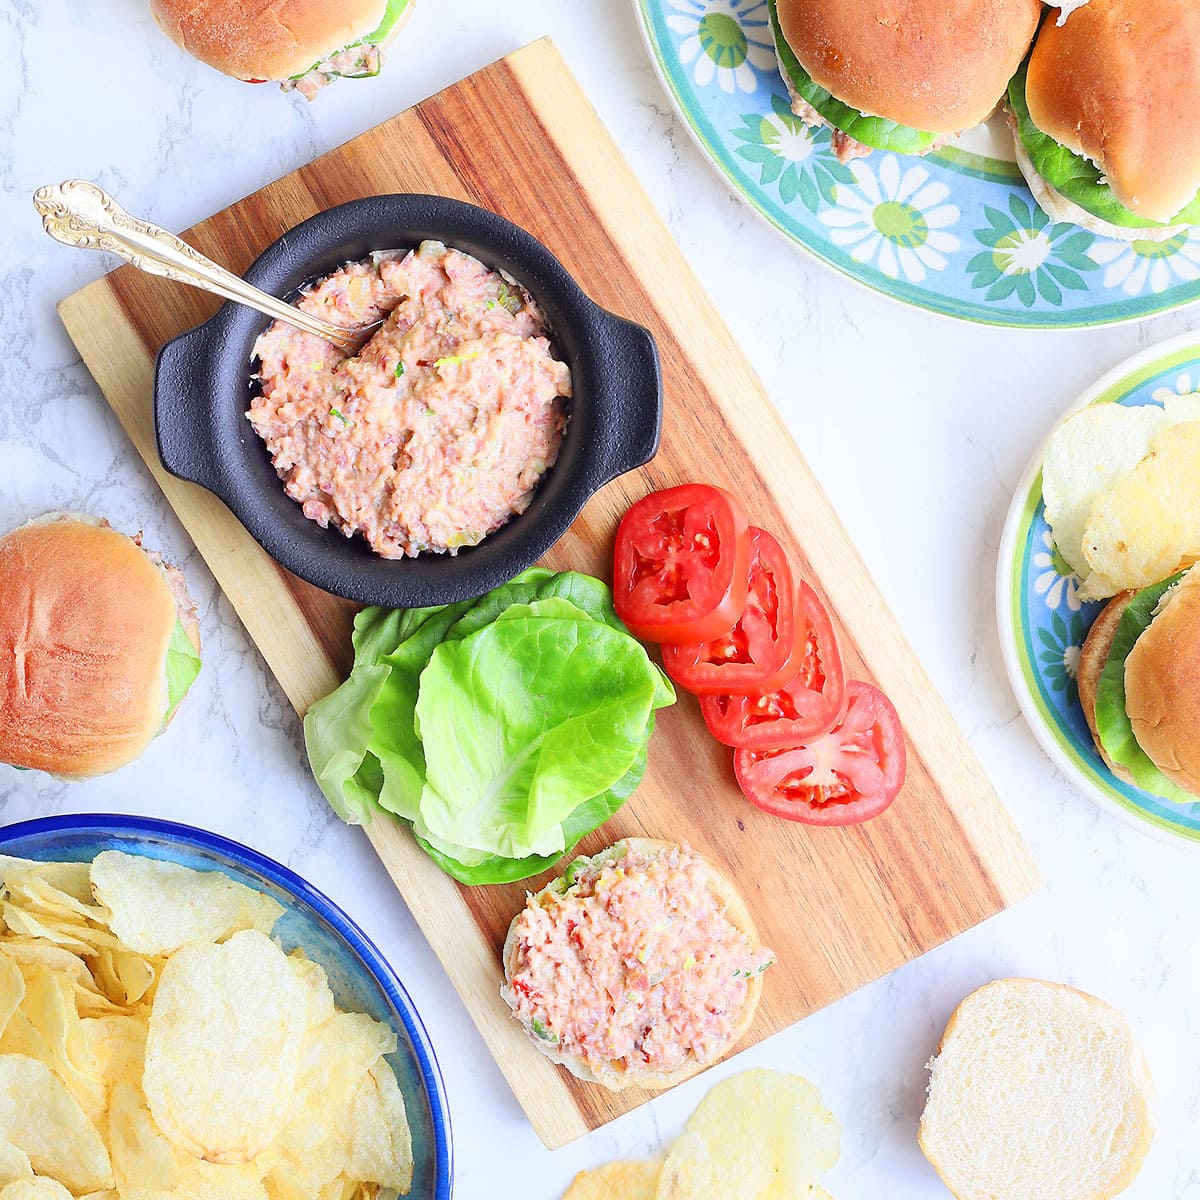 Old fashioned ham salad recipe in a small serving bowl on a cutting board with slider buns, lettuce and sliced tomatoes.